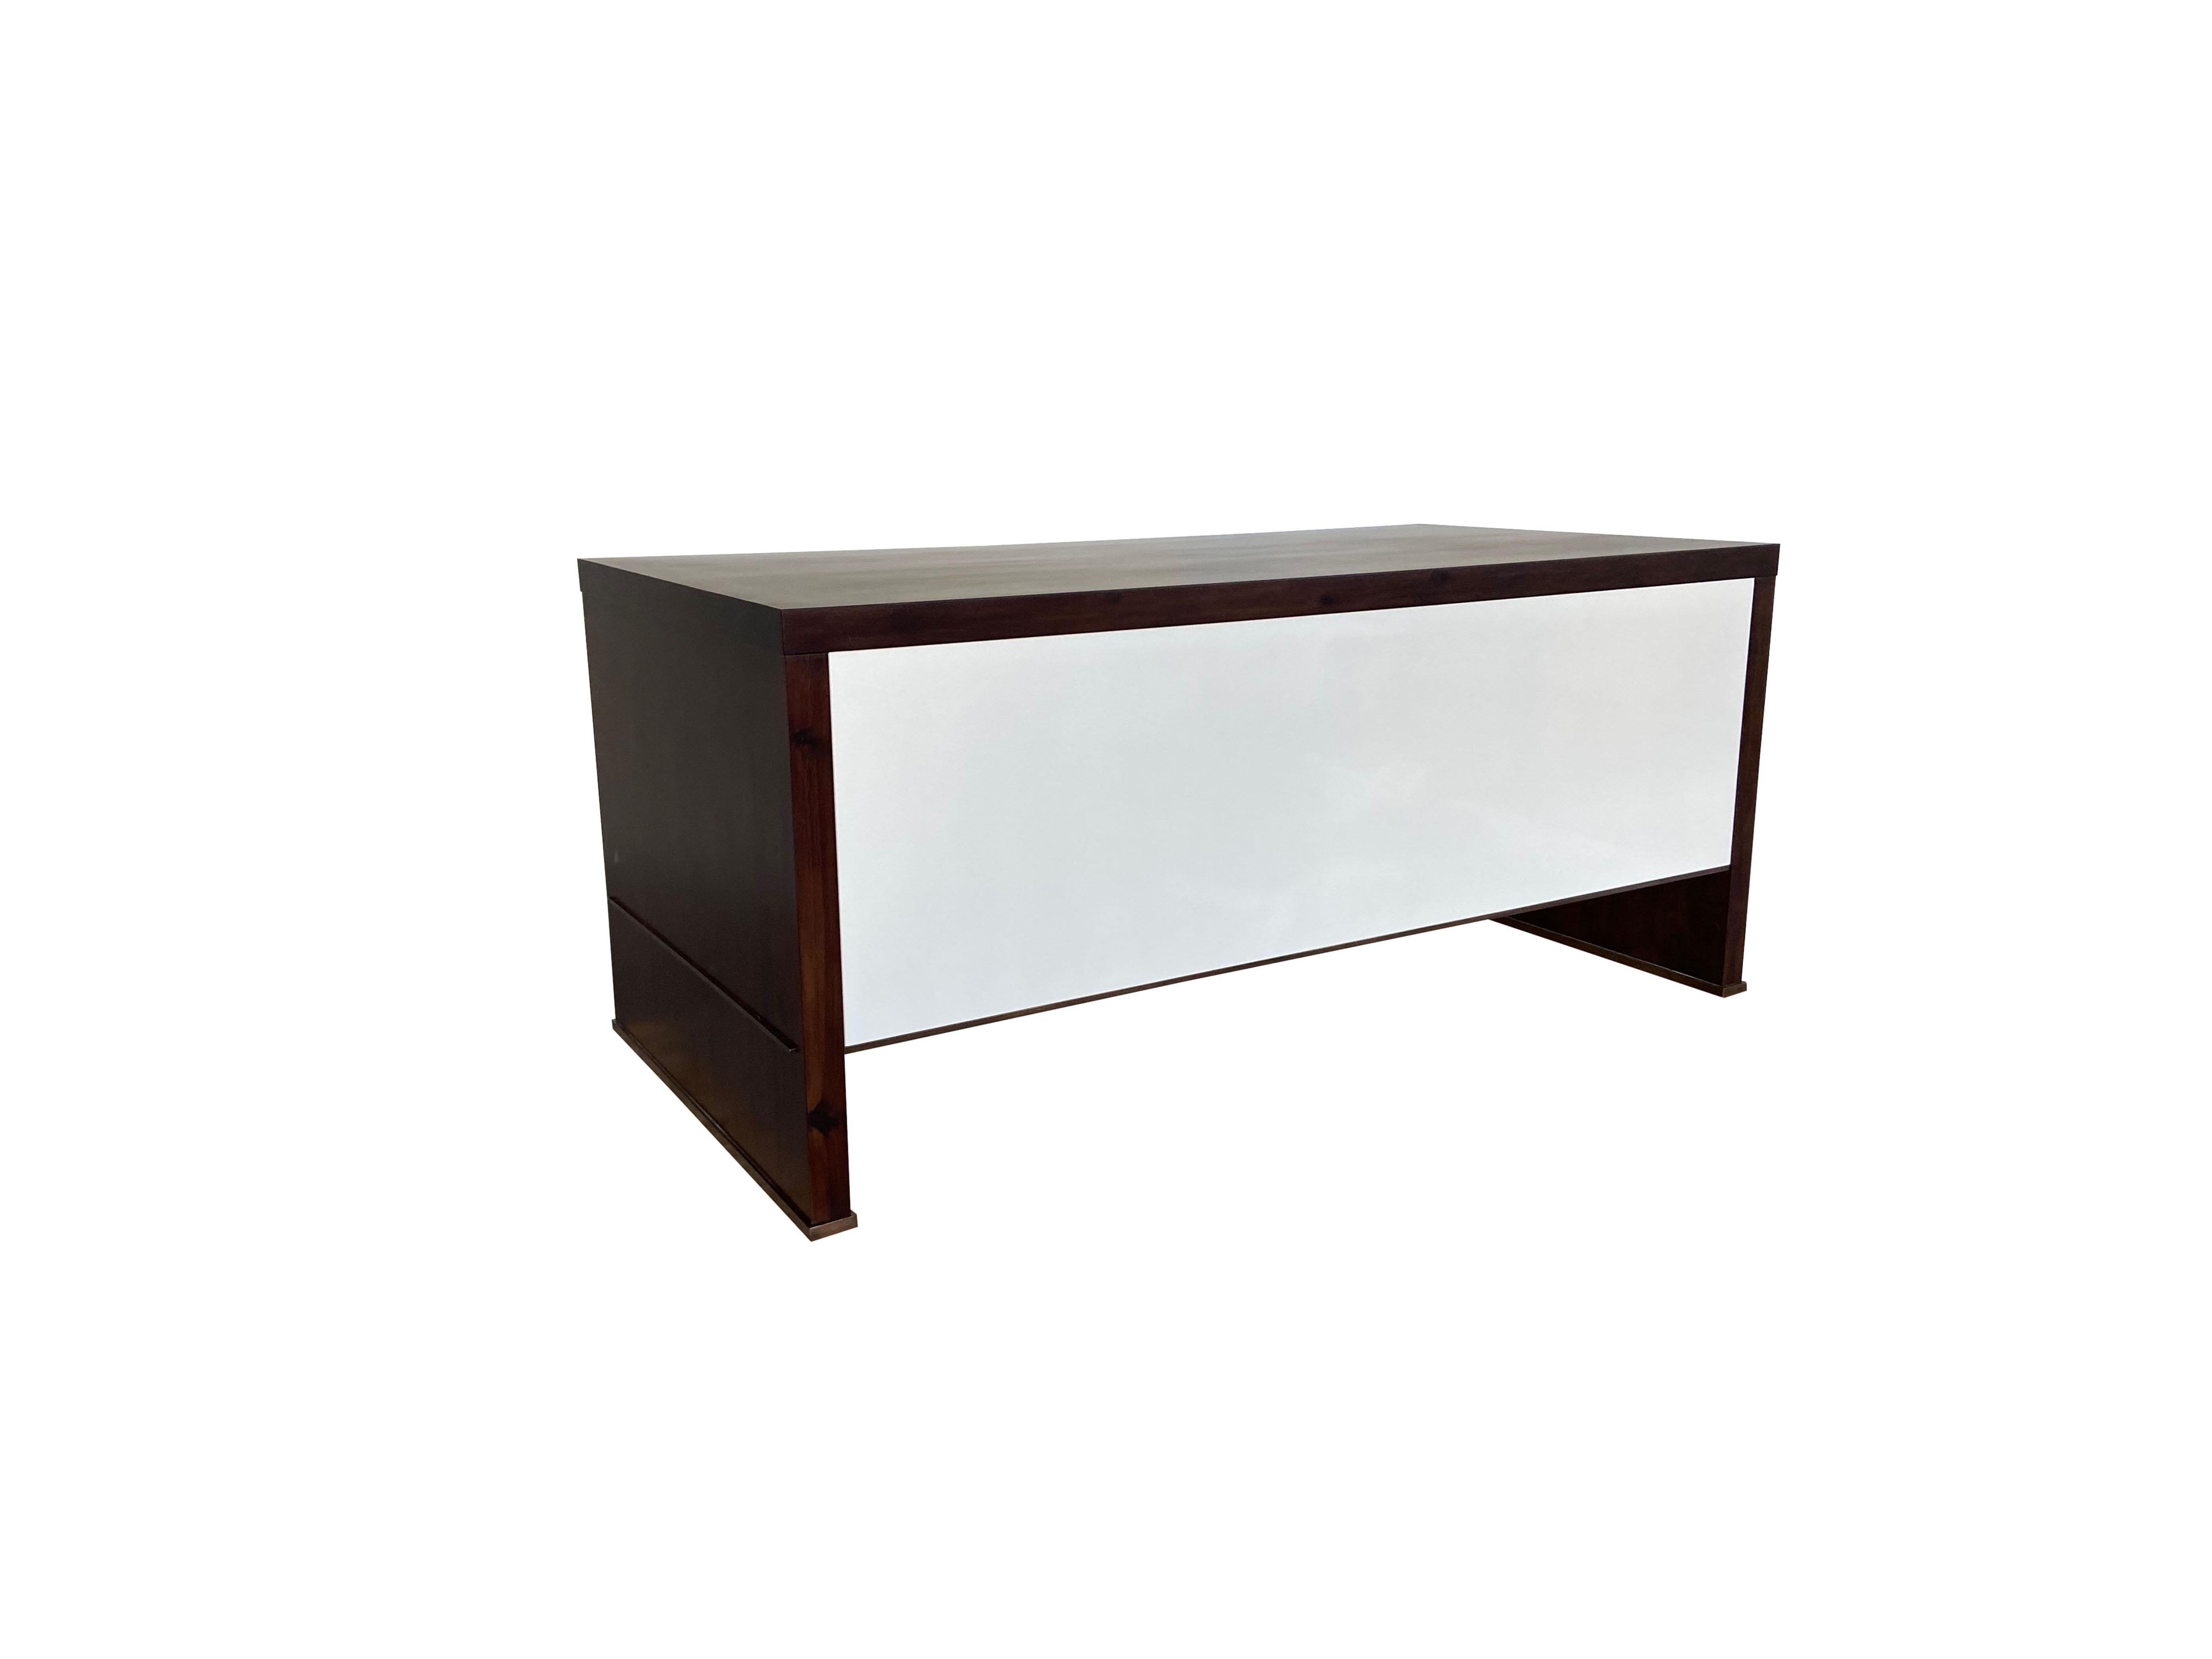 This Classic yet modern desk features an Argentine Rosewood body and white mirror-polished lacquered face and drawers with bronze accents. The drawers feature soft-close hardware and can be used with the pulls of your choice, or as shown, with none.